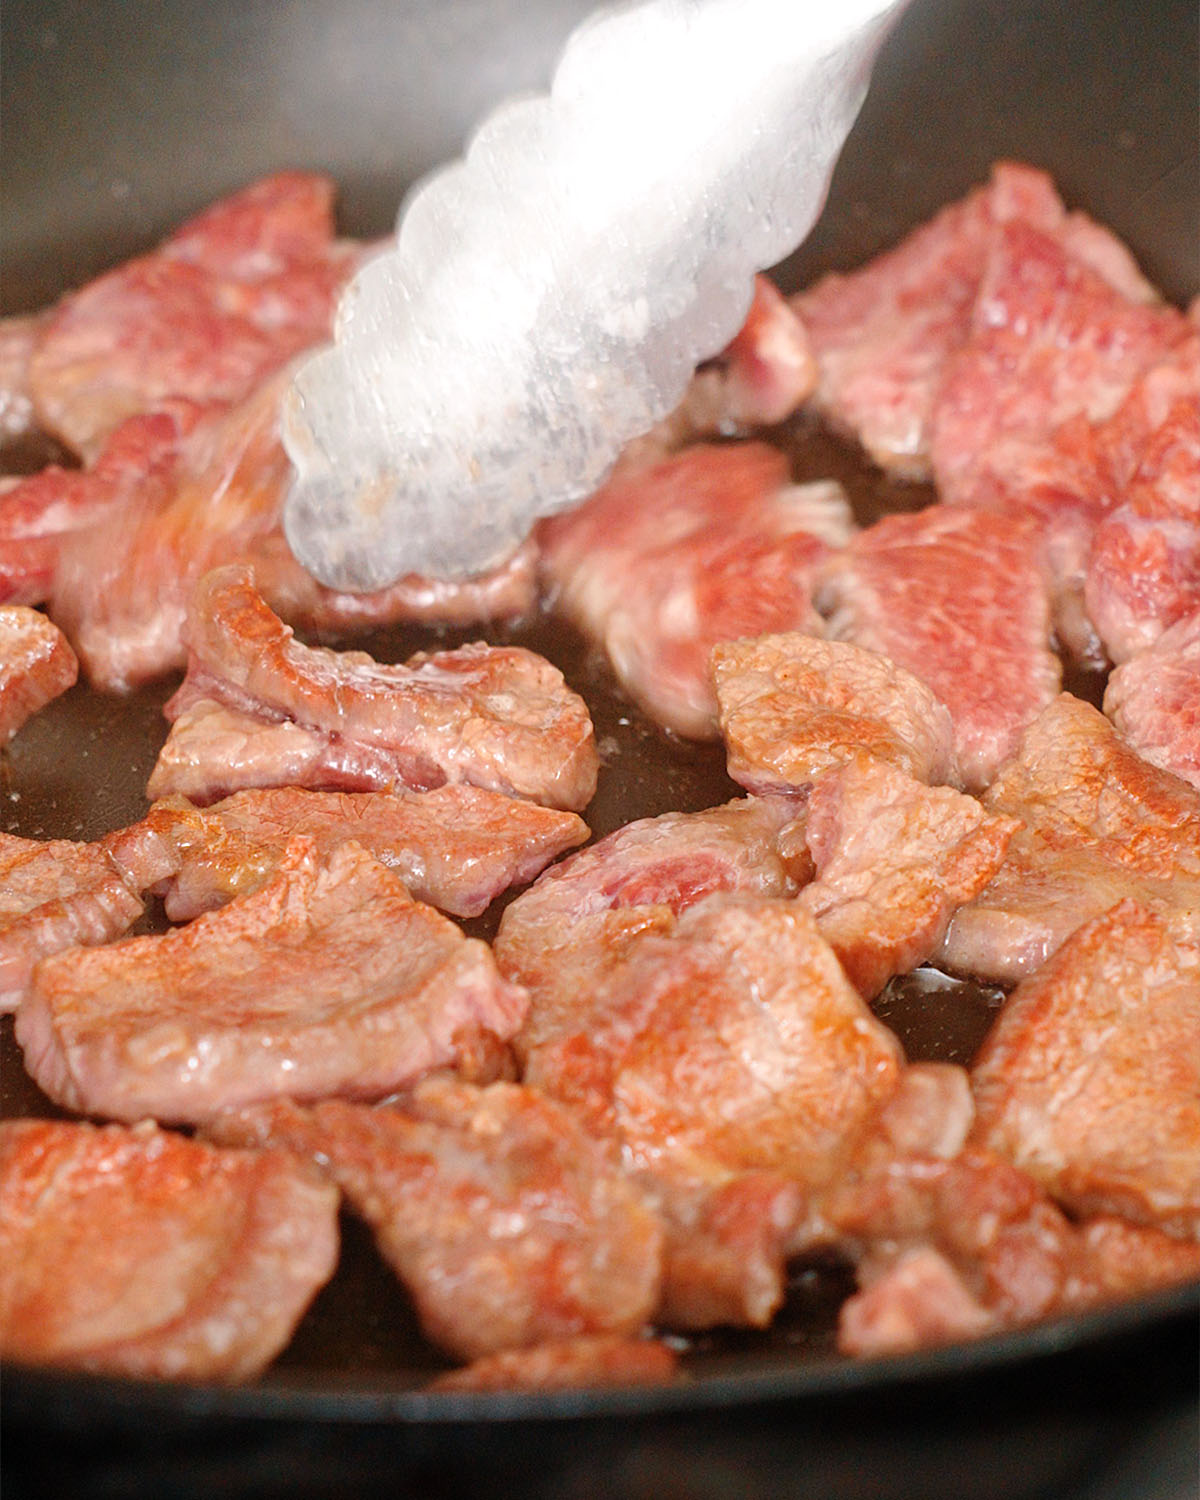 Turning over the sliced beef in the pan to sear each side.